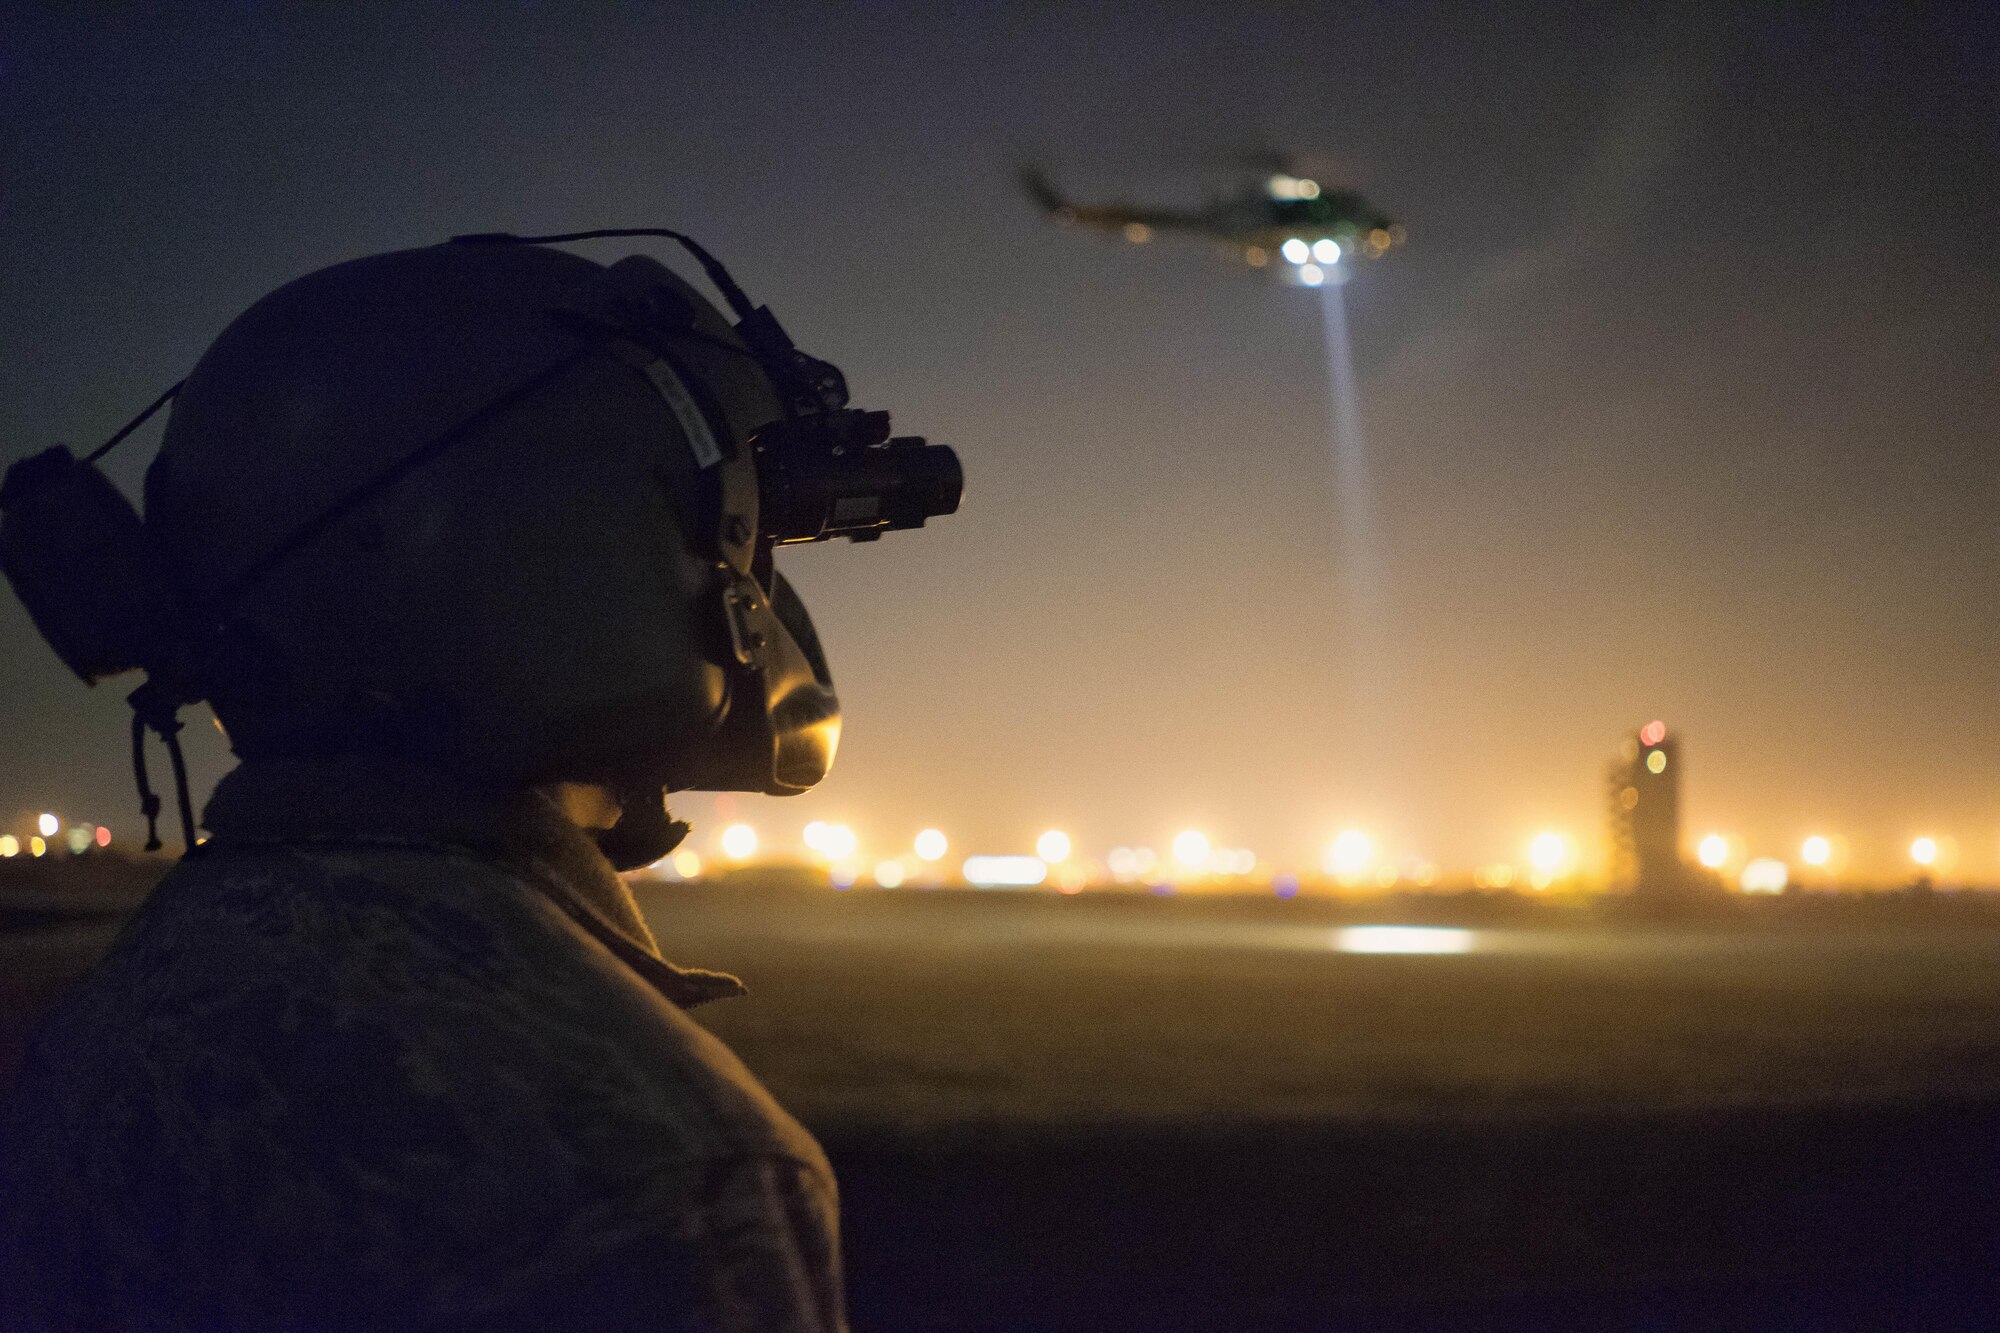 Tech. Sgt. Michael Wright, 459th Airlift Squadron UH-1N Huey flight engineer, watches as a UH-1N prepares to lift a stokes litter at Yokota Air Base, Japan, Feb. 23, 2016. The 459th AS recently improved their search and rescue capabilities by outfitting two Hueys with new rescue hoists. Previously, without the hoist, conducting rescues in small, tight areas wasn’t feasible. Now, 459th AS aircrew can conduct any type of search and rescue scenario throughout the Kanto Plains. (U.S. Air Force photo by Airman 1st Class Delano Scott/Released)